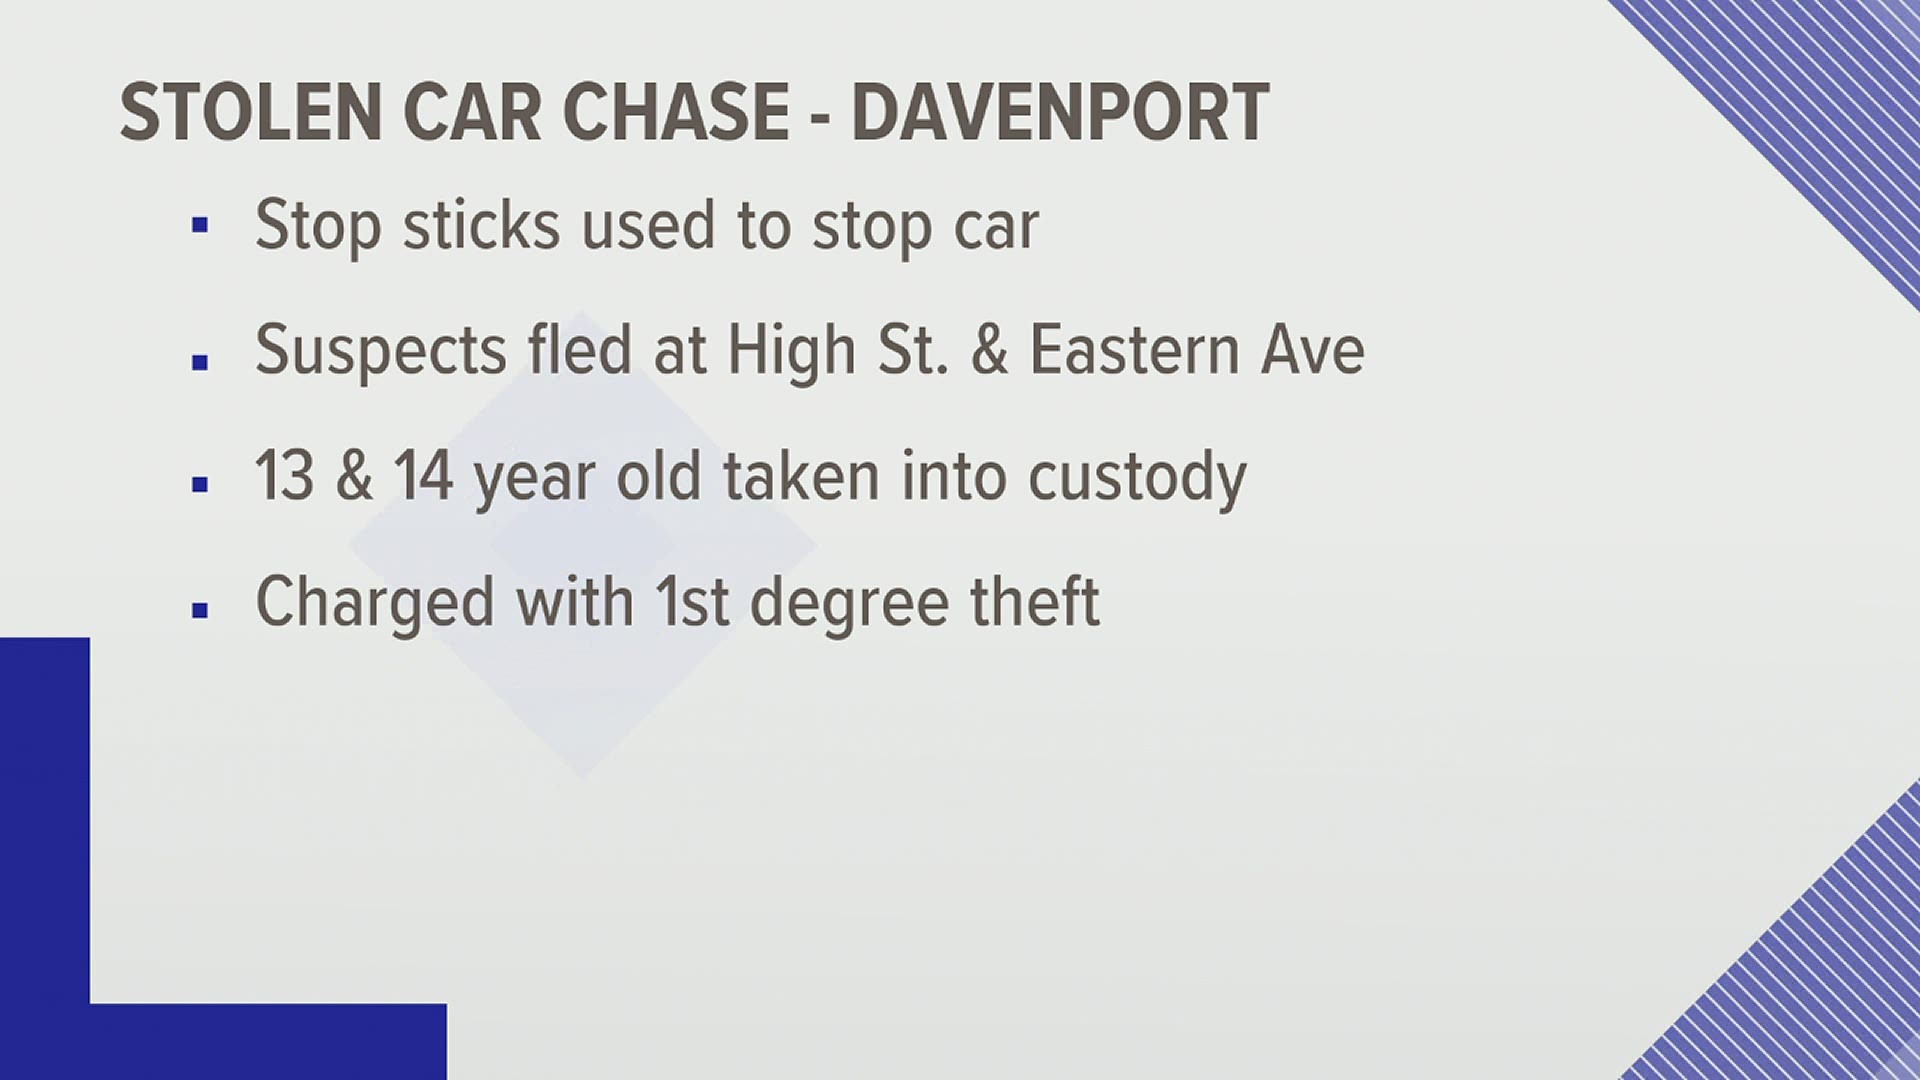 Two groups of 13 and 14-year-olds were sent to Davenport's Juvenile Detention Center after being charged with stealing cars.